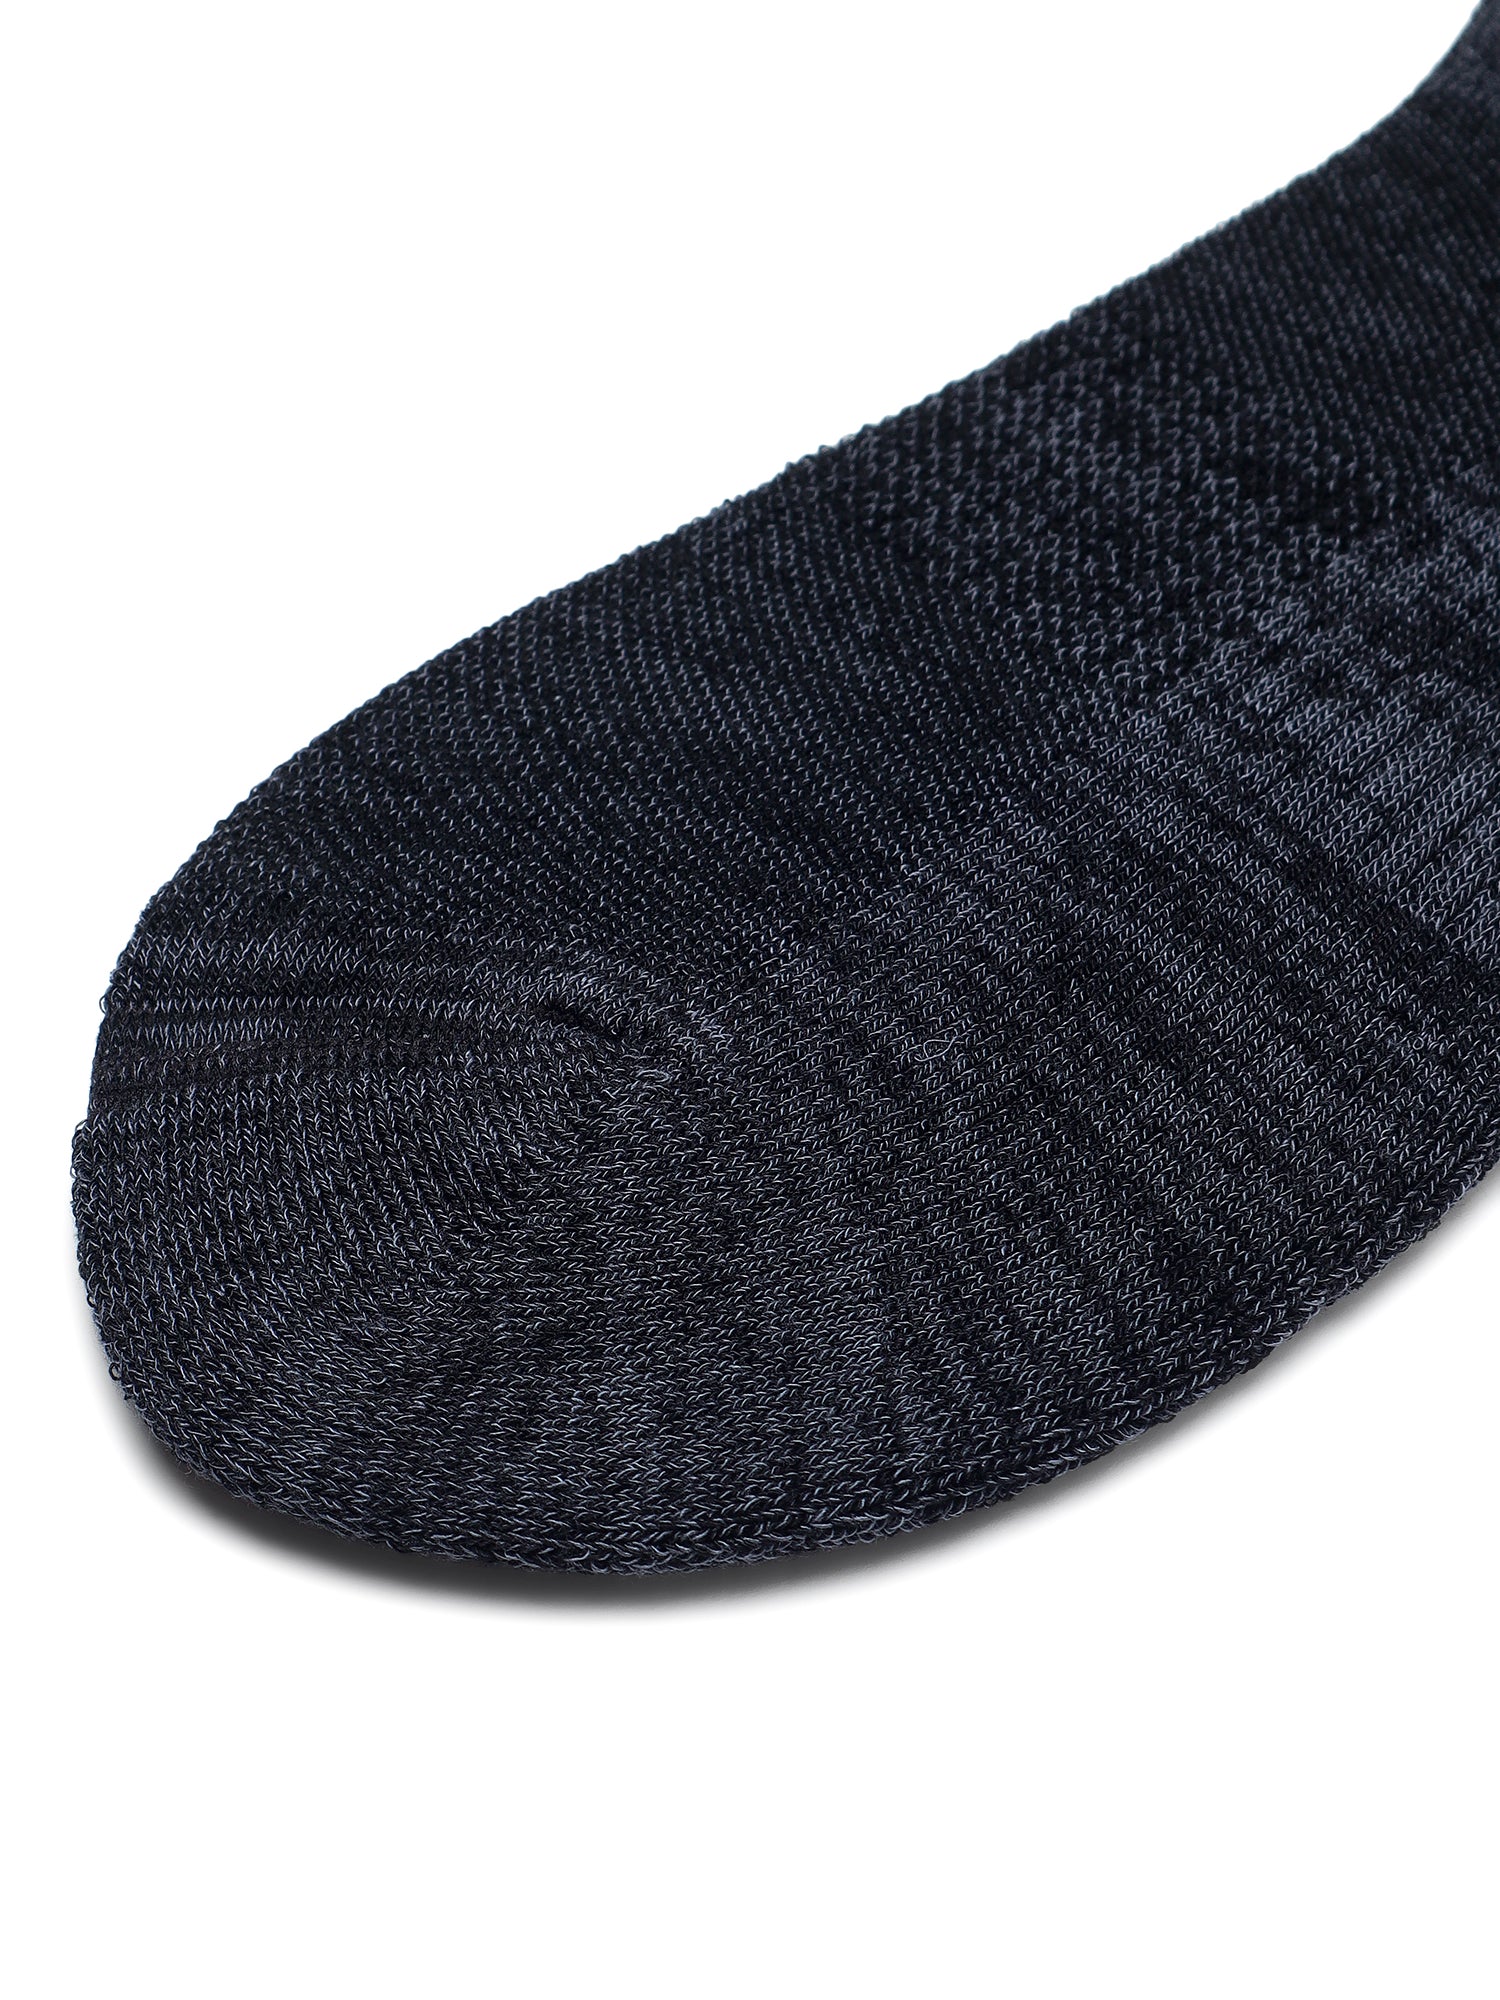 Worlds Best Sock ! Classic Formal Series